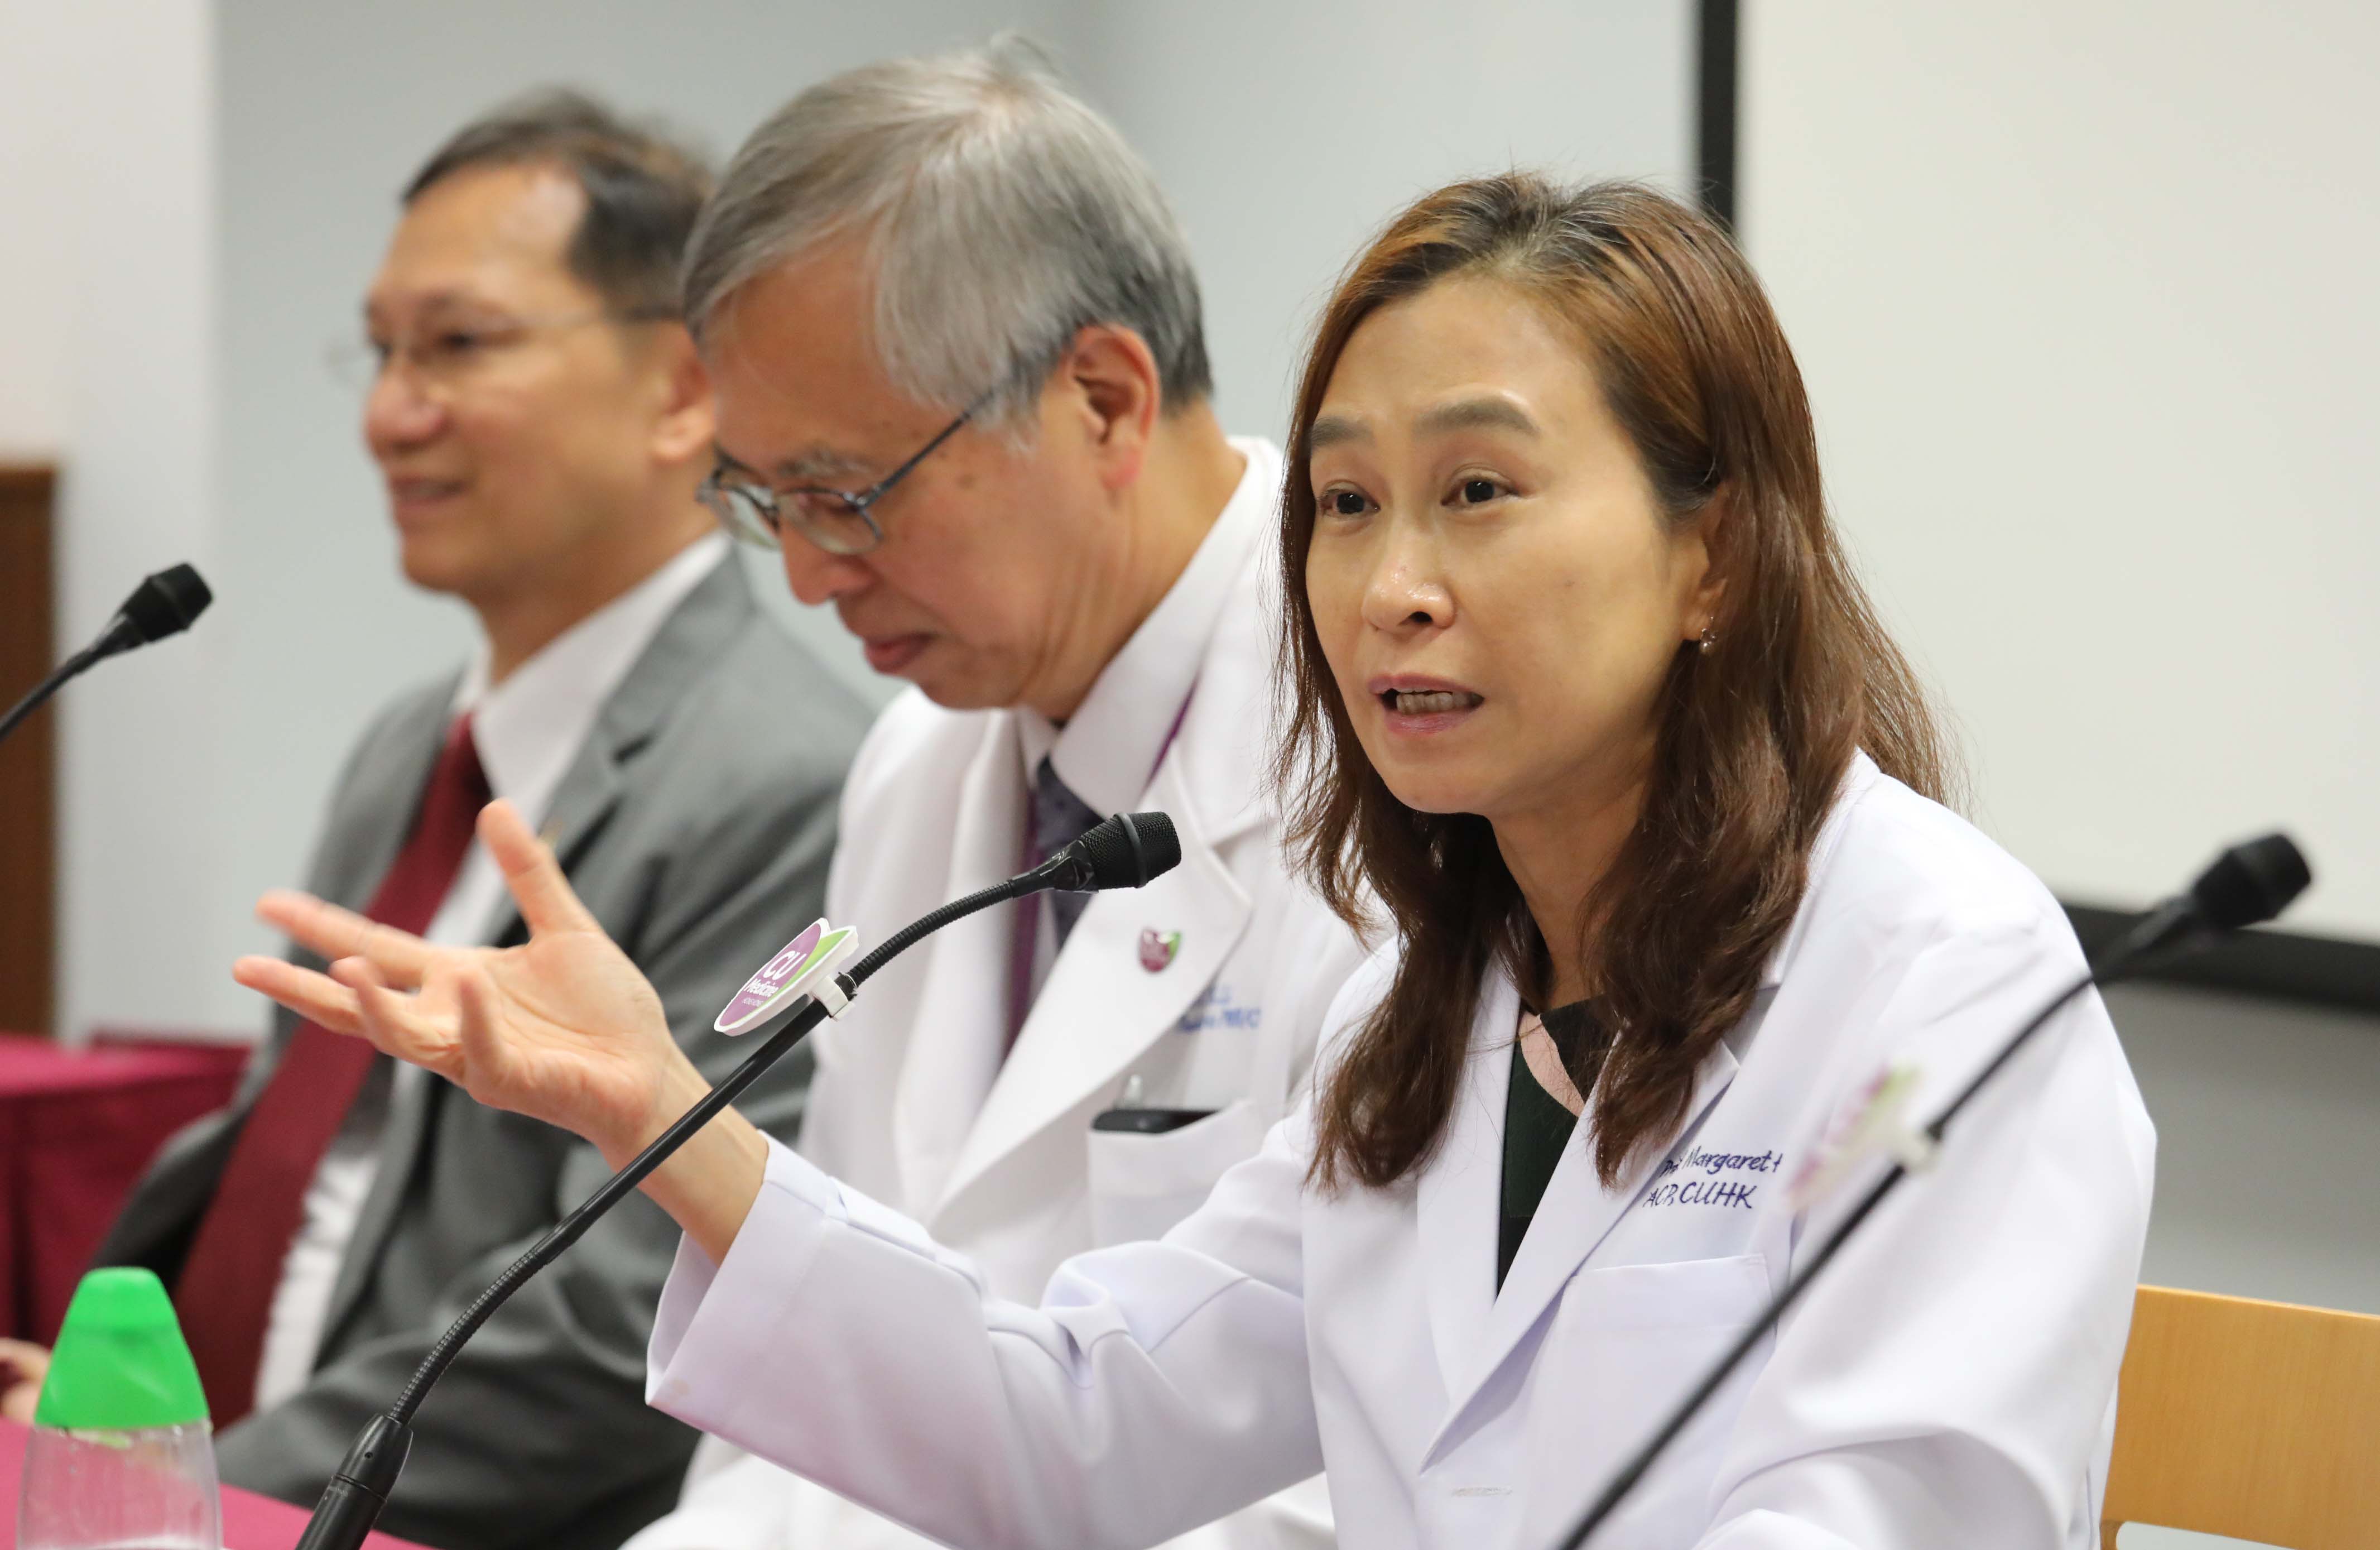 Professor Margaret NG (right), Professor of the Department of Anatomical and Cellular Pathology of the Faculty of Medicine at CUHK, explains that in CAR-T cell therapy, a patient’s T cells are genetically modified to build in radar-like receptors on the cells. The T-cells can recognise and attack cancer cells after being reinfused into the patient’s body.